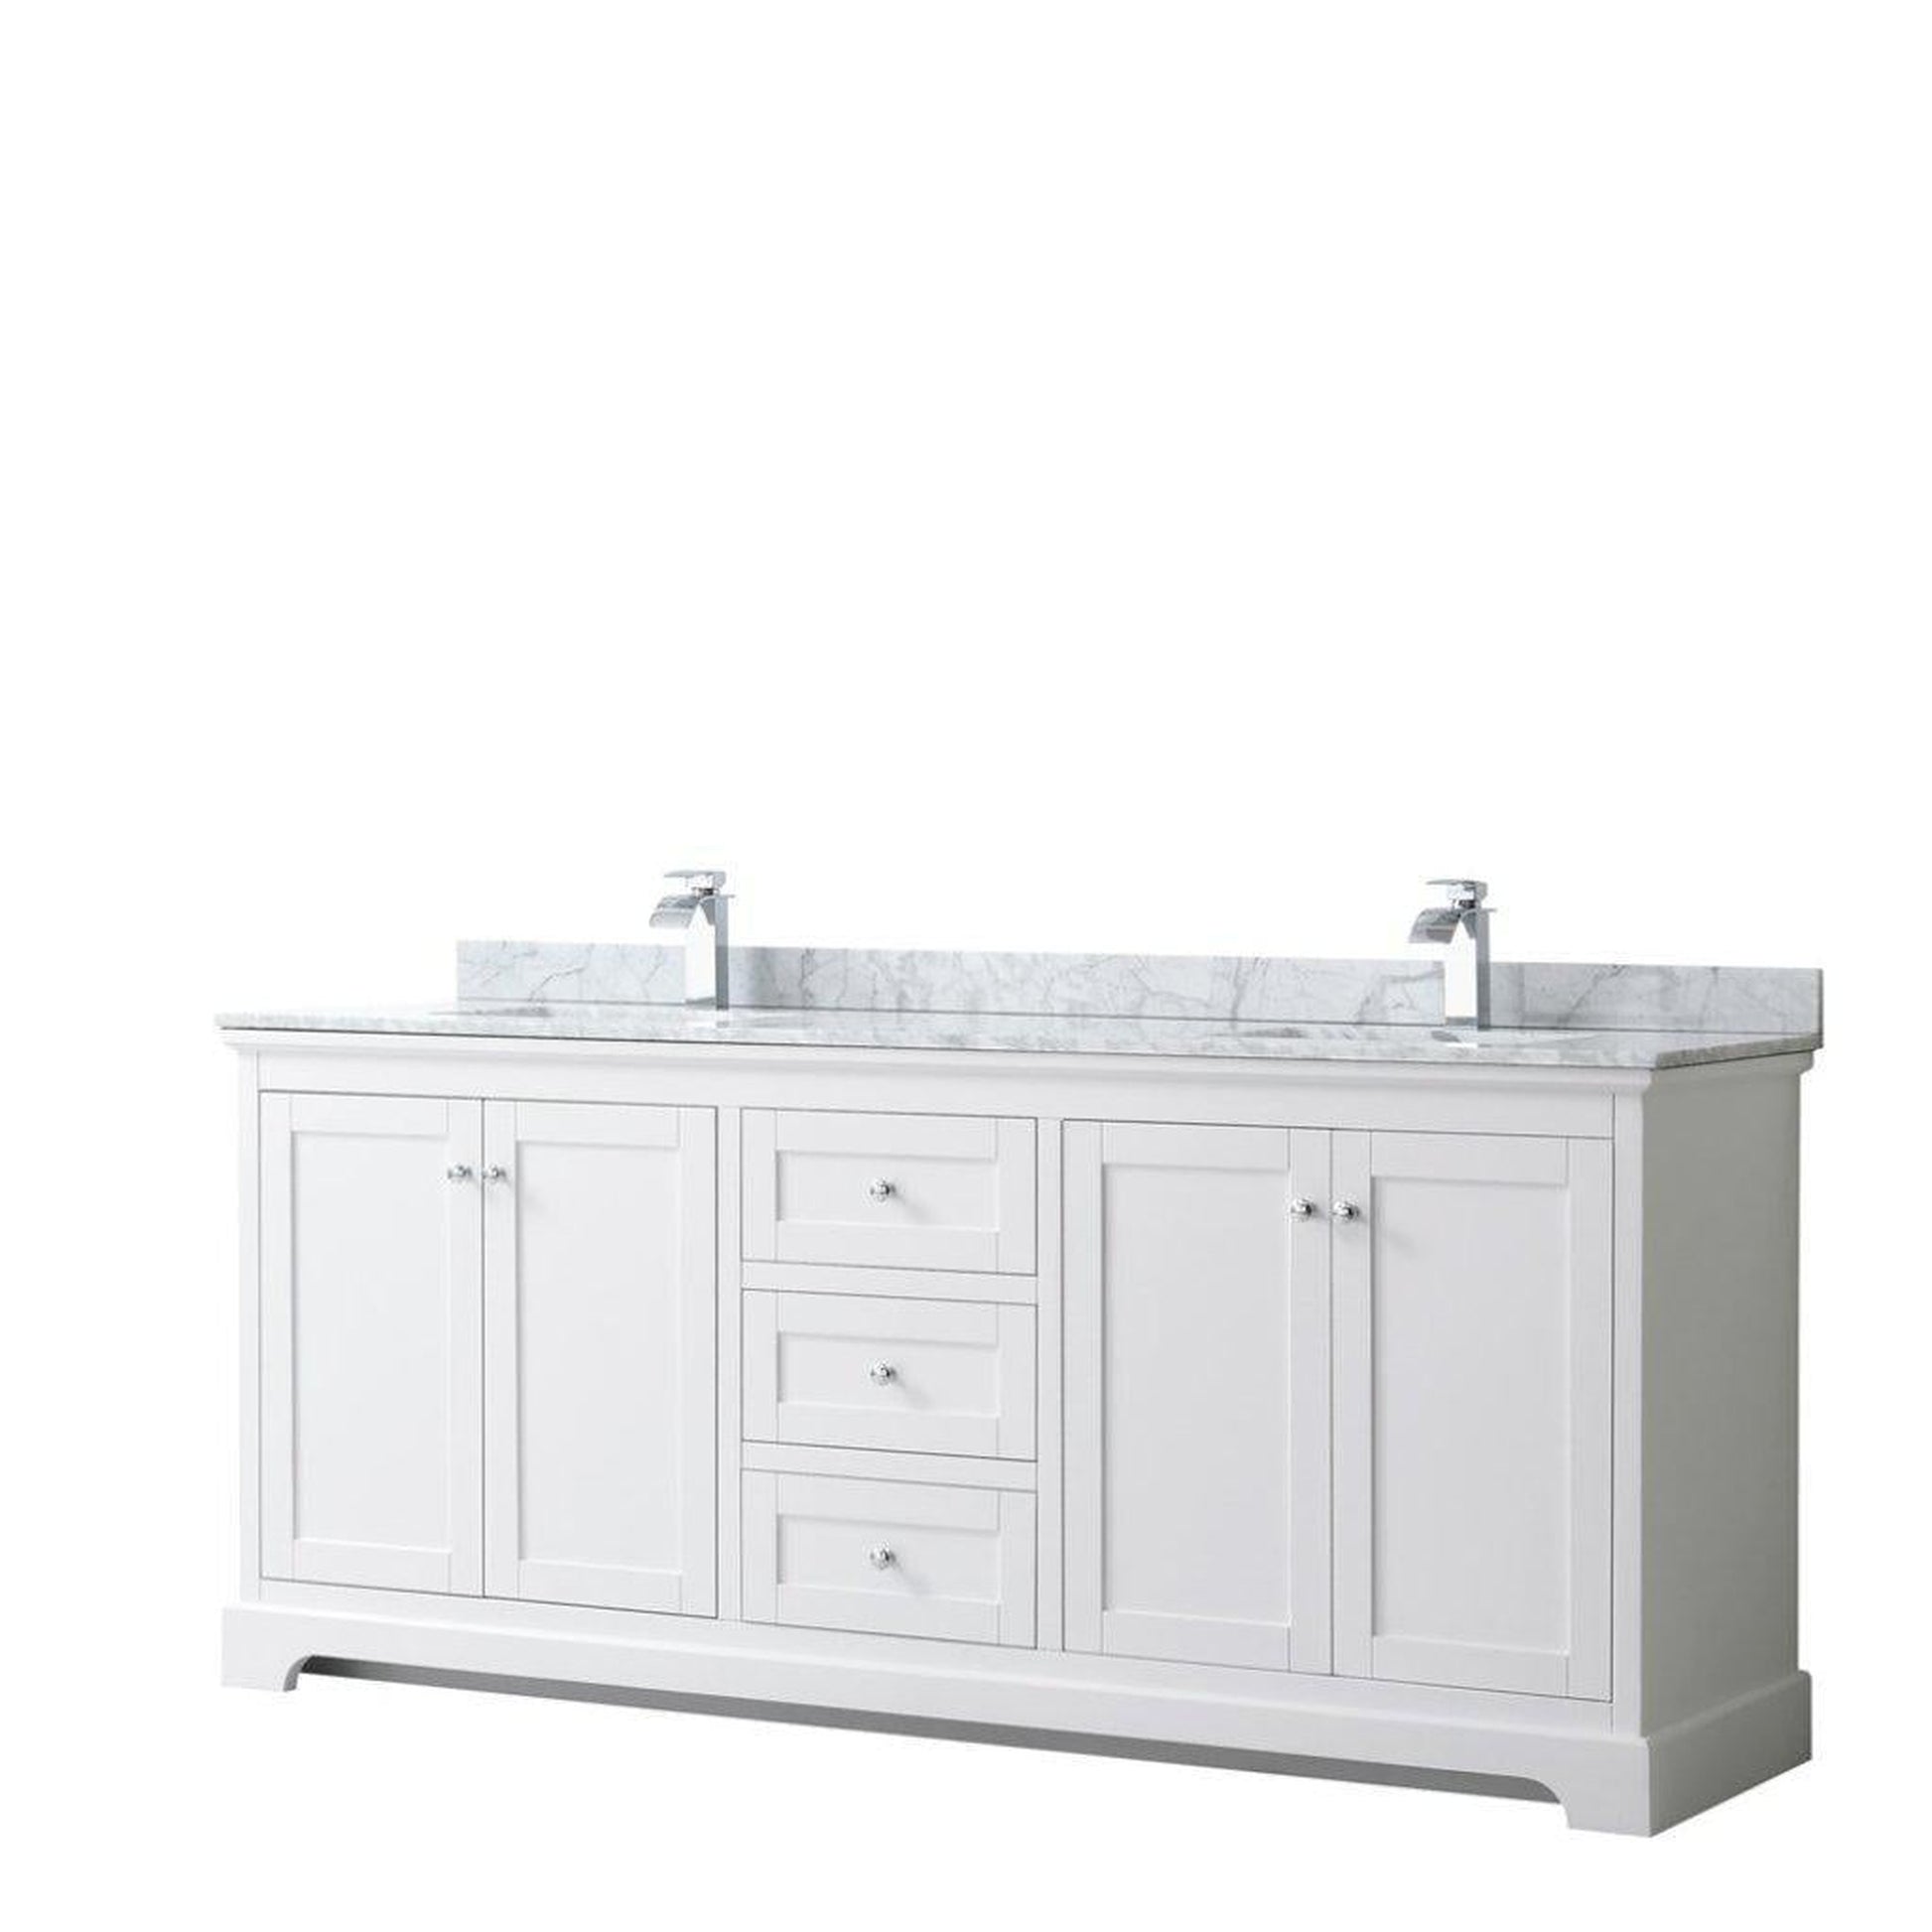 Wyndham Collection Avery 80" White Double Bathroom Vanity, White Carrara Marble Countertop With 1-Hole Faucet, Square Sink, Polished Chrome Trims